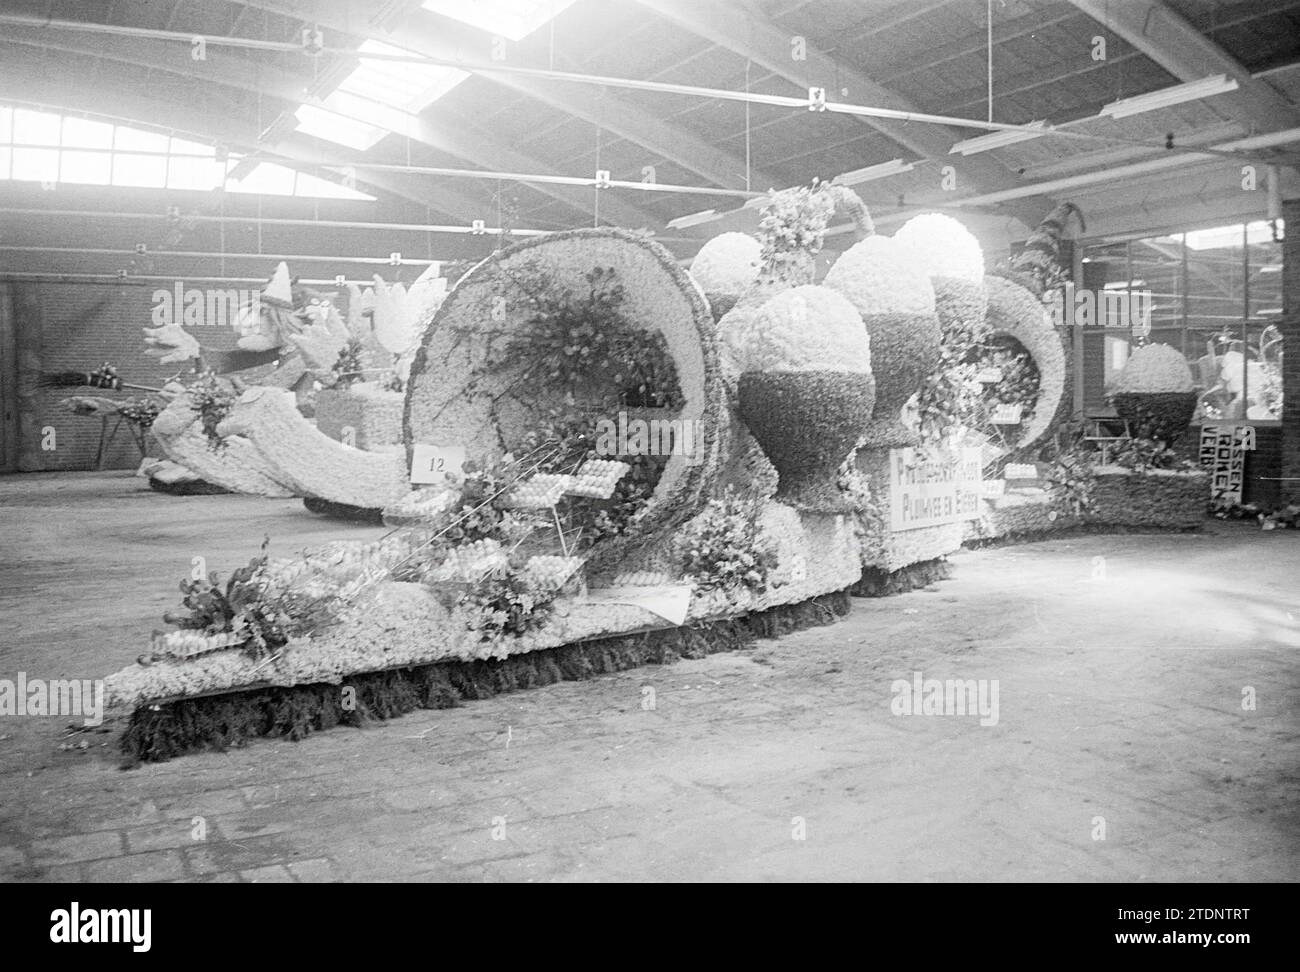 Floats in H.B.G., Flower Parade, flower exhibition, 01-05-1964, Whizgle News from the Past, Tailored for the Future. Explore historical narratives, Dutch The Netherlands agency image with a modern perspective, bridging the gap between yesterday's events and tomorrow's insights. A timeless journey shaping the stories that shape our future Stock Photo